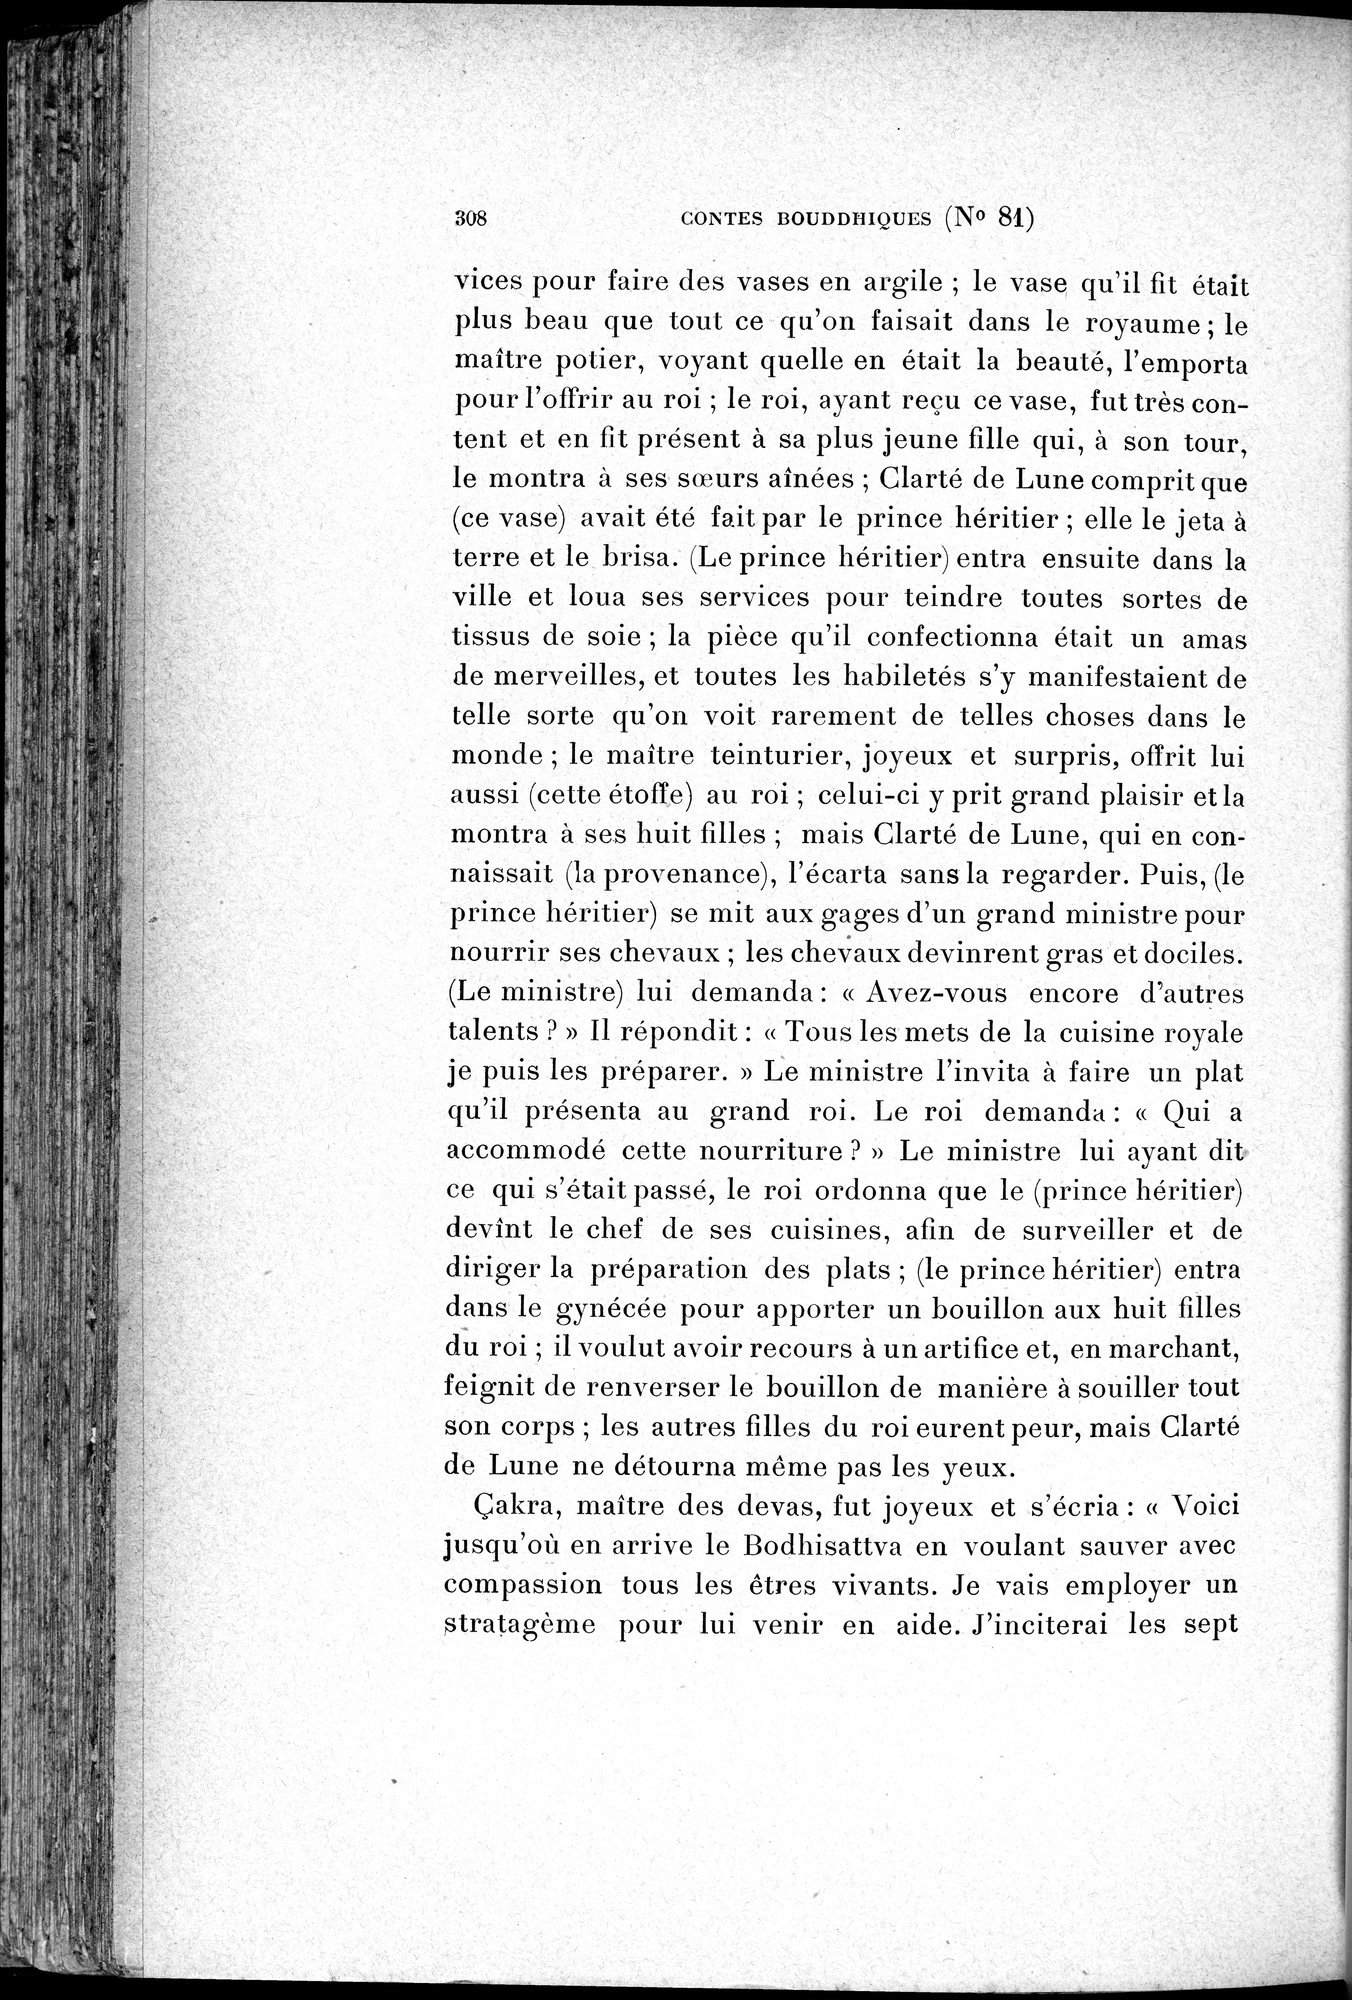 Cinq Cents Contes et Apologues : vol.1 / Page 342 (Grayscale High Resolution Image)